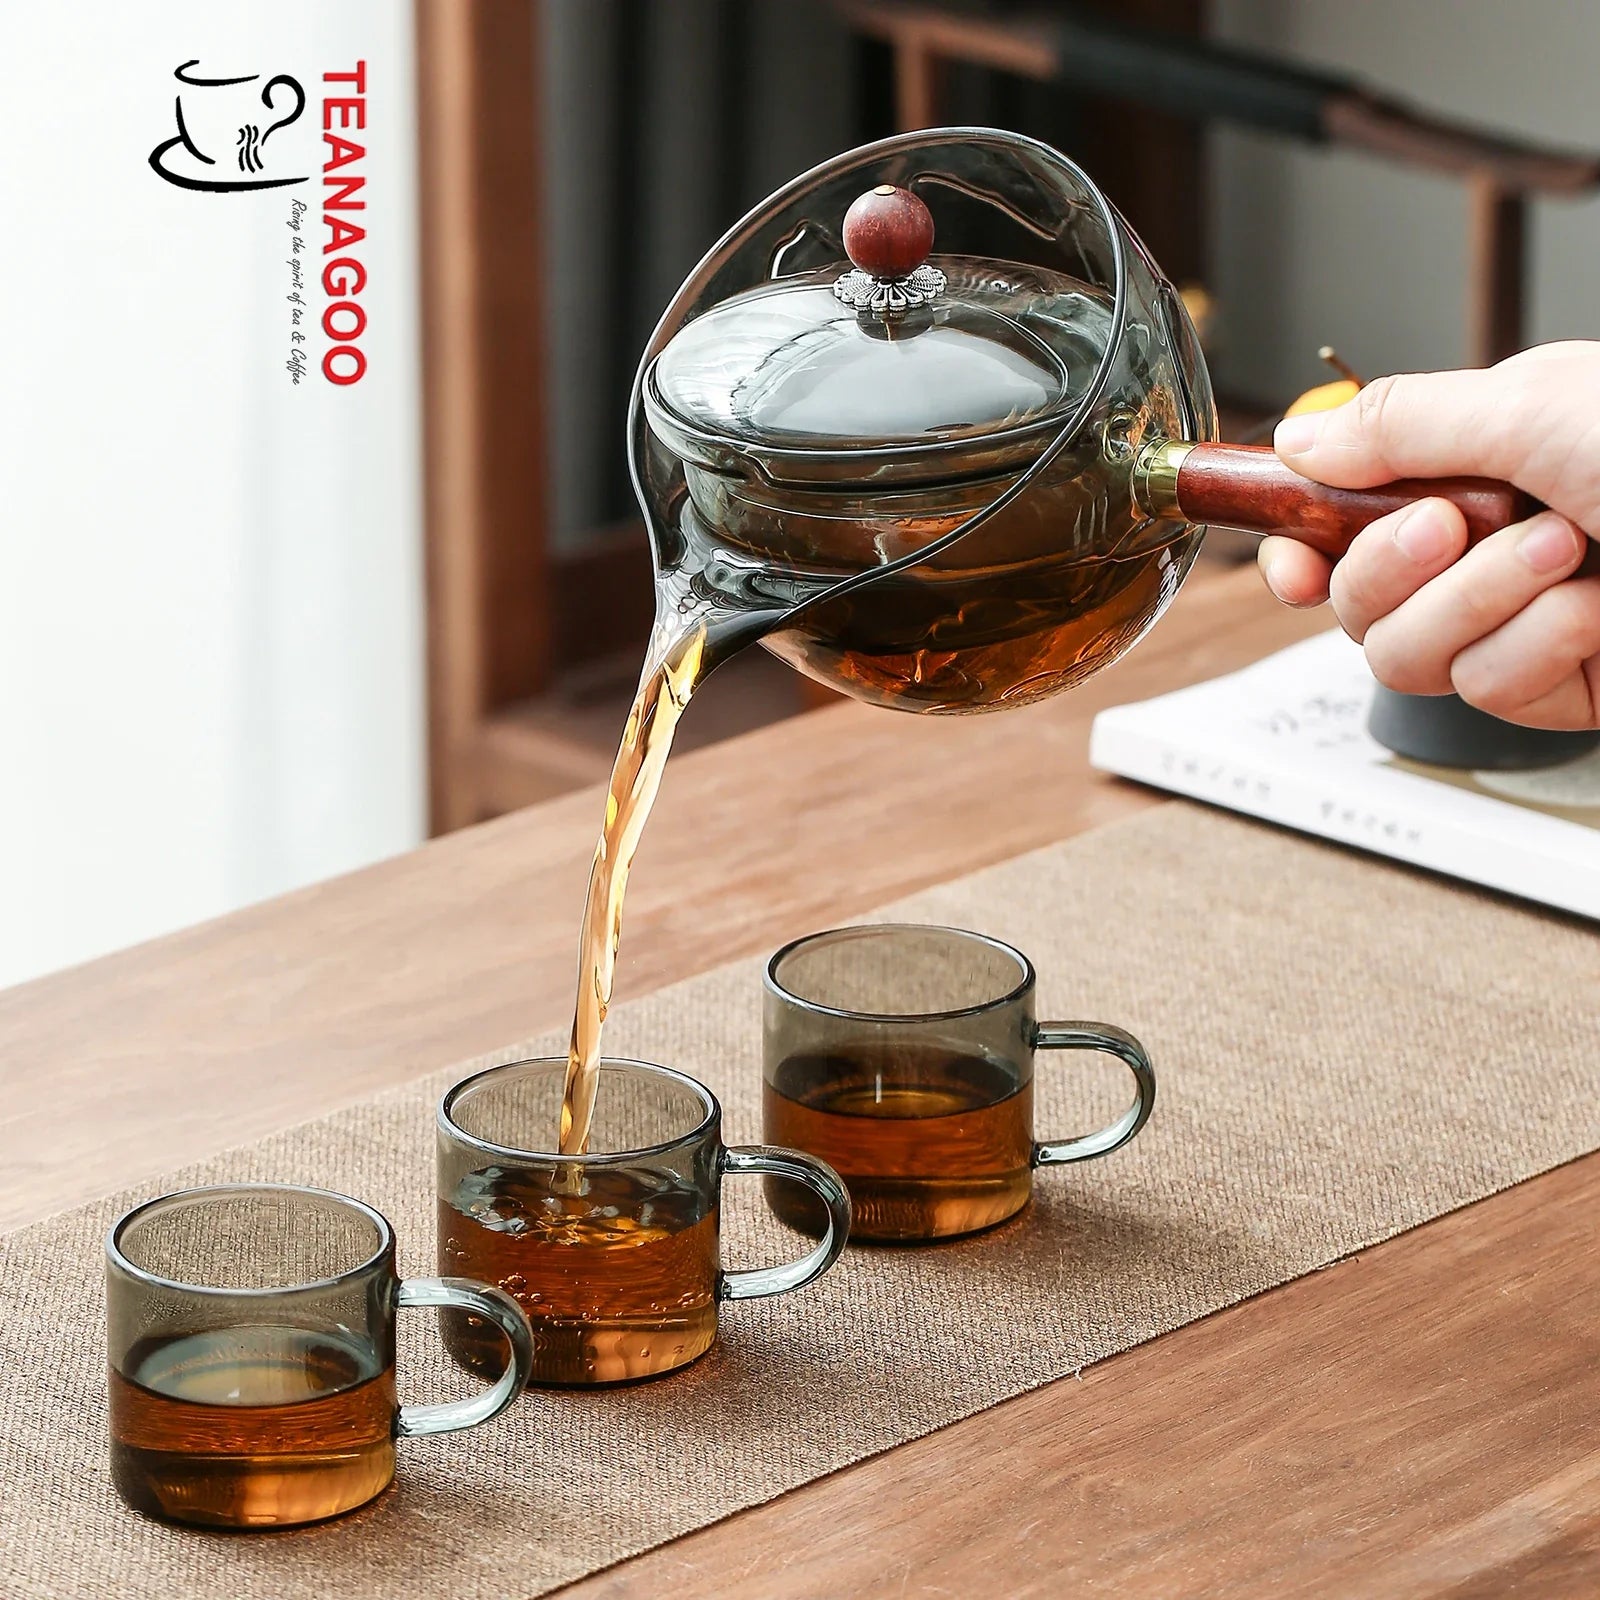 How to Pick The Best Teapot For Loose Leaf Tea